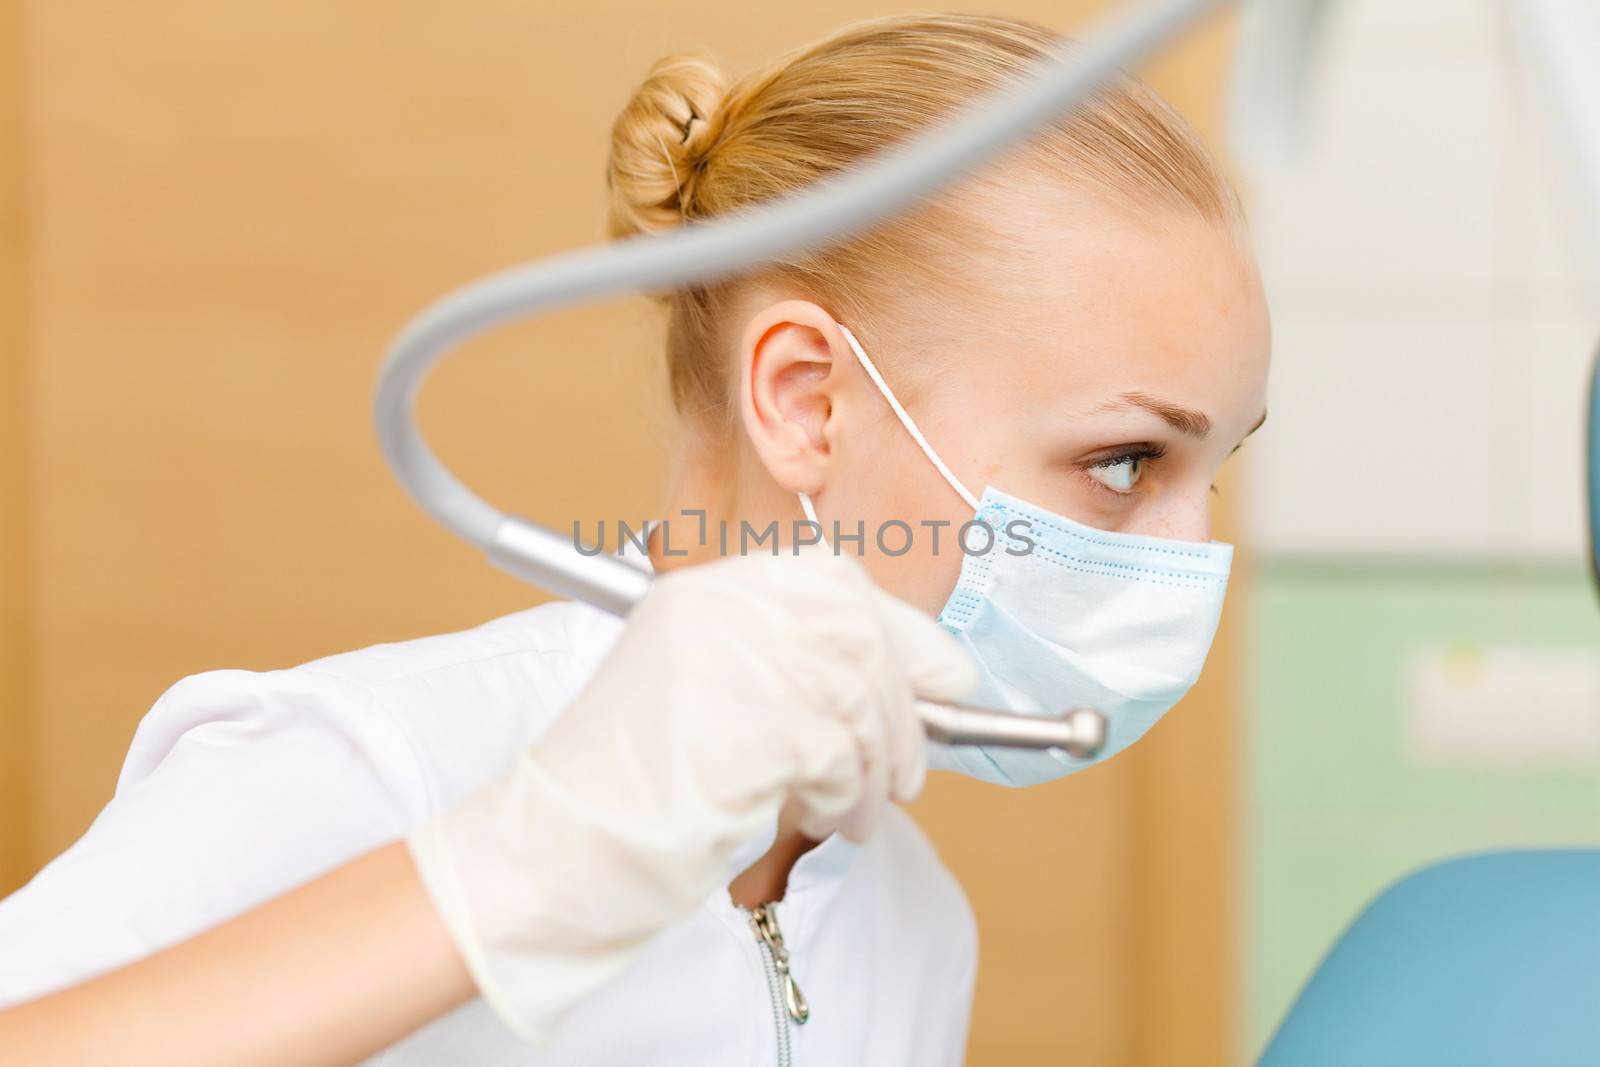 A portrait of a dental worker by sergey_nivens